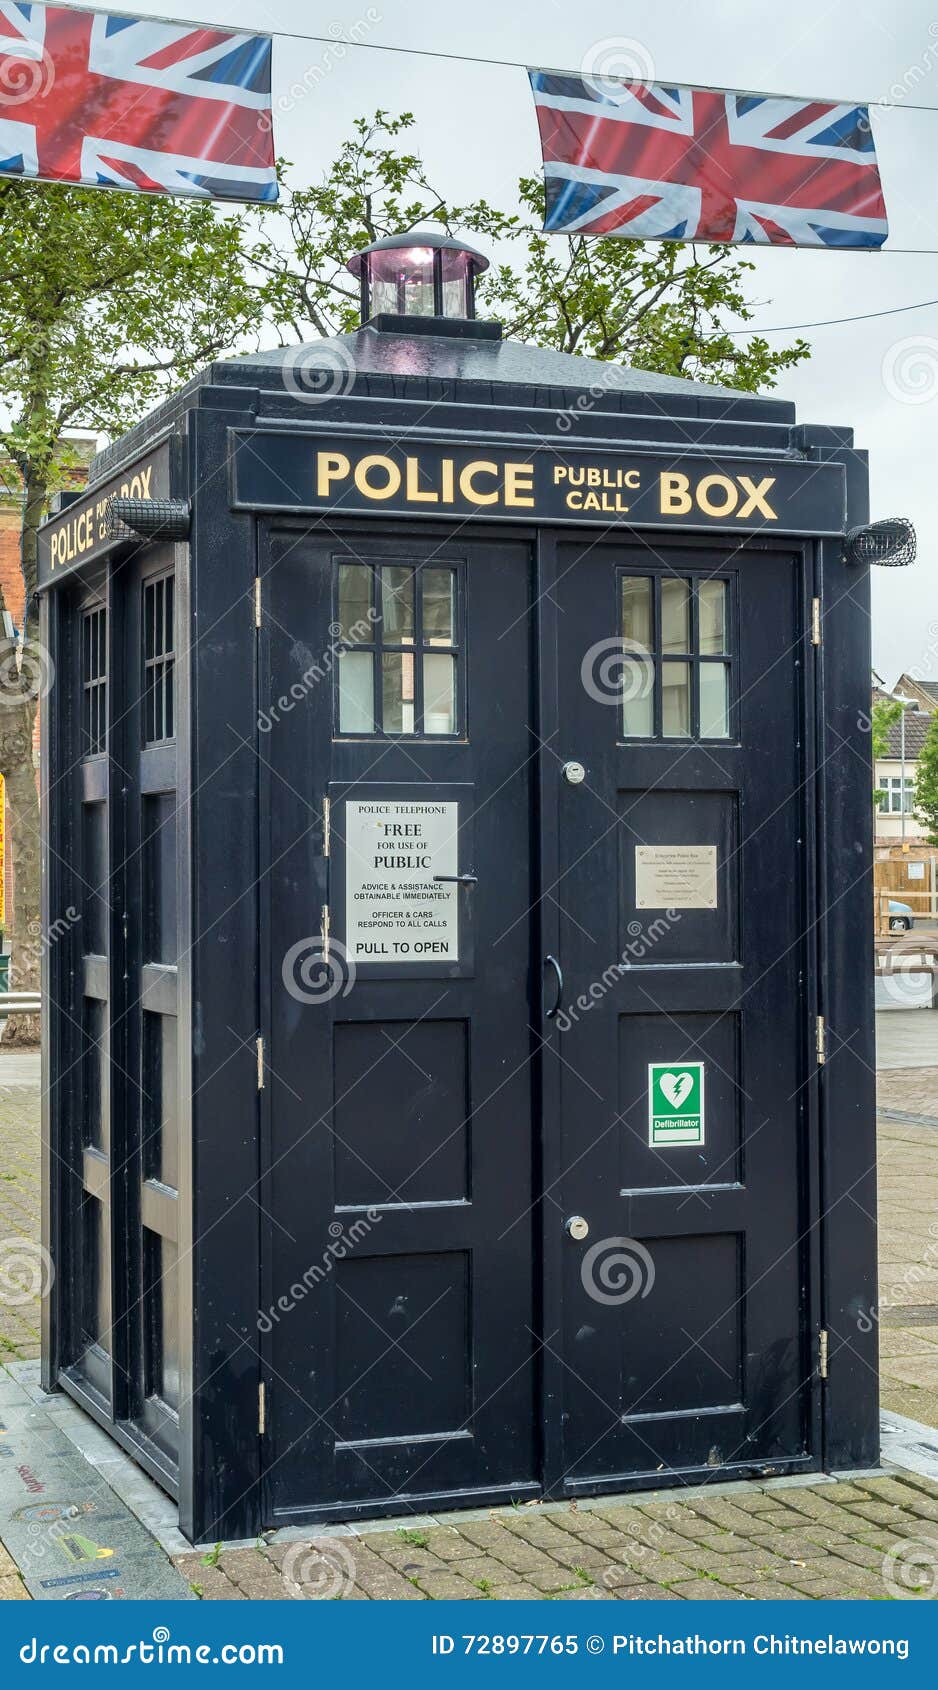 Police call box in England stock image. Image of outdoor - 72897765